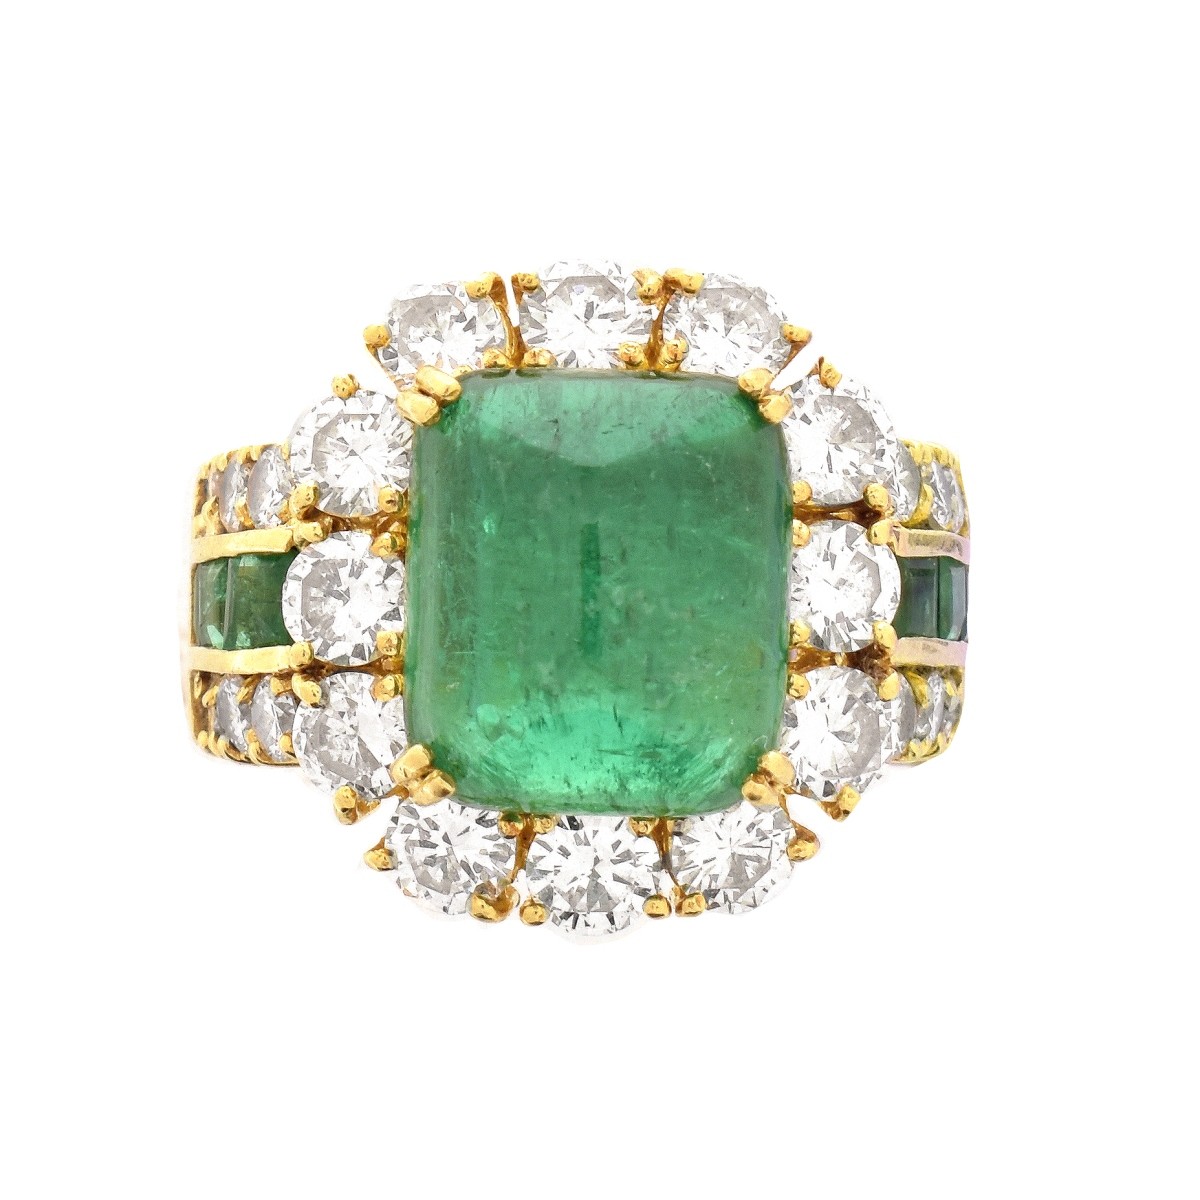 Sugarloaf Emerald, Diamond and 18K Ring | Kodner Auctions